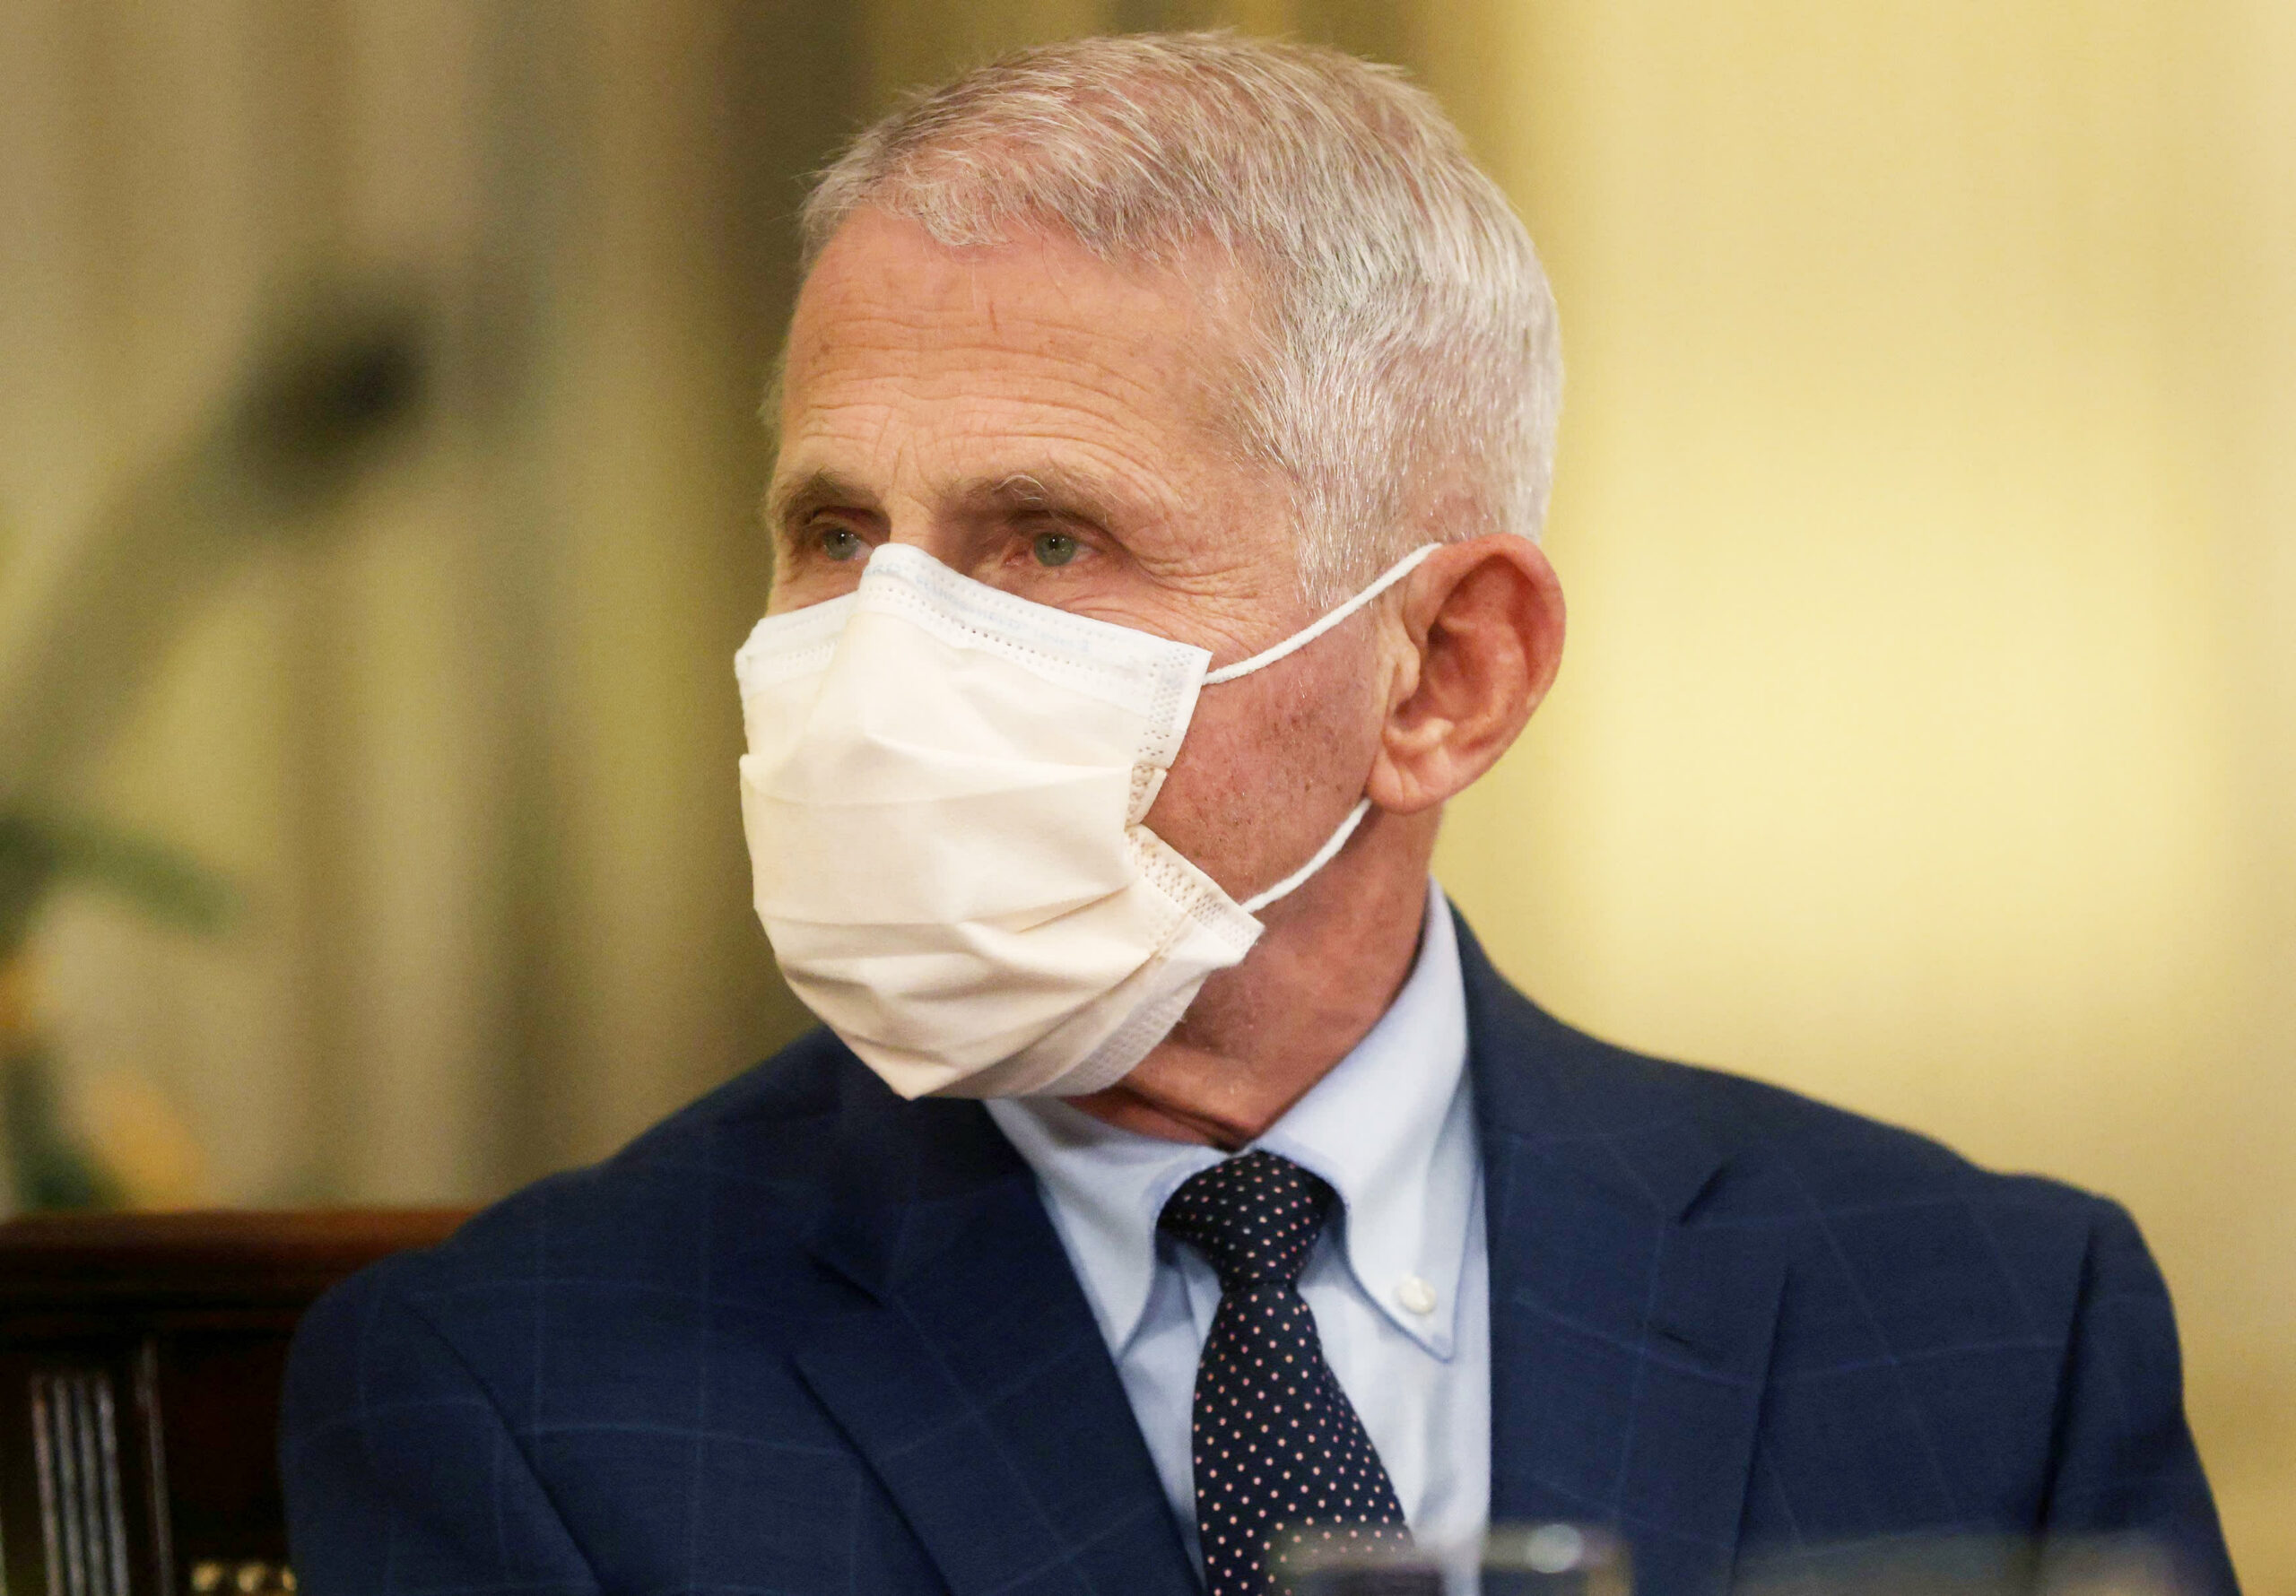 U.S. is considering recommending that individuals exposed to Covid end isolation if they’ve tested negative for the virus after five days, Dr. Fauci says